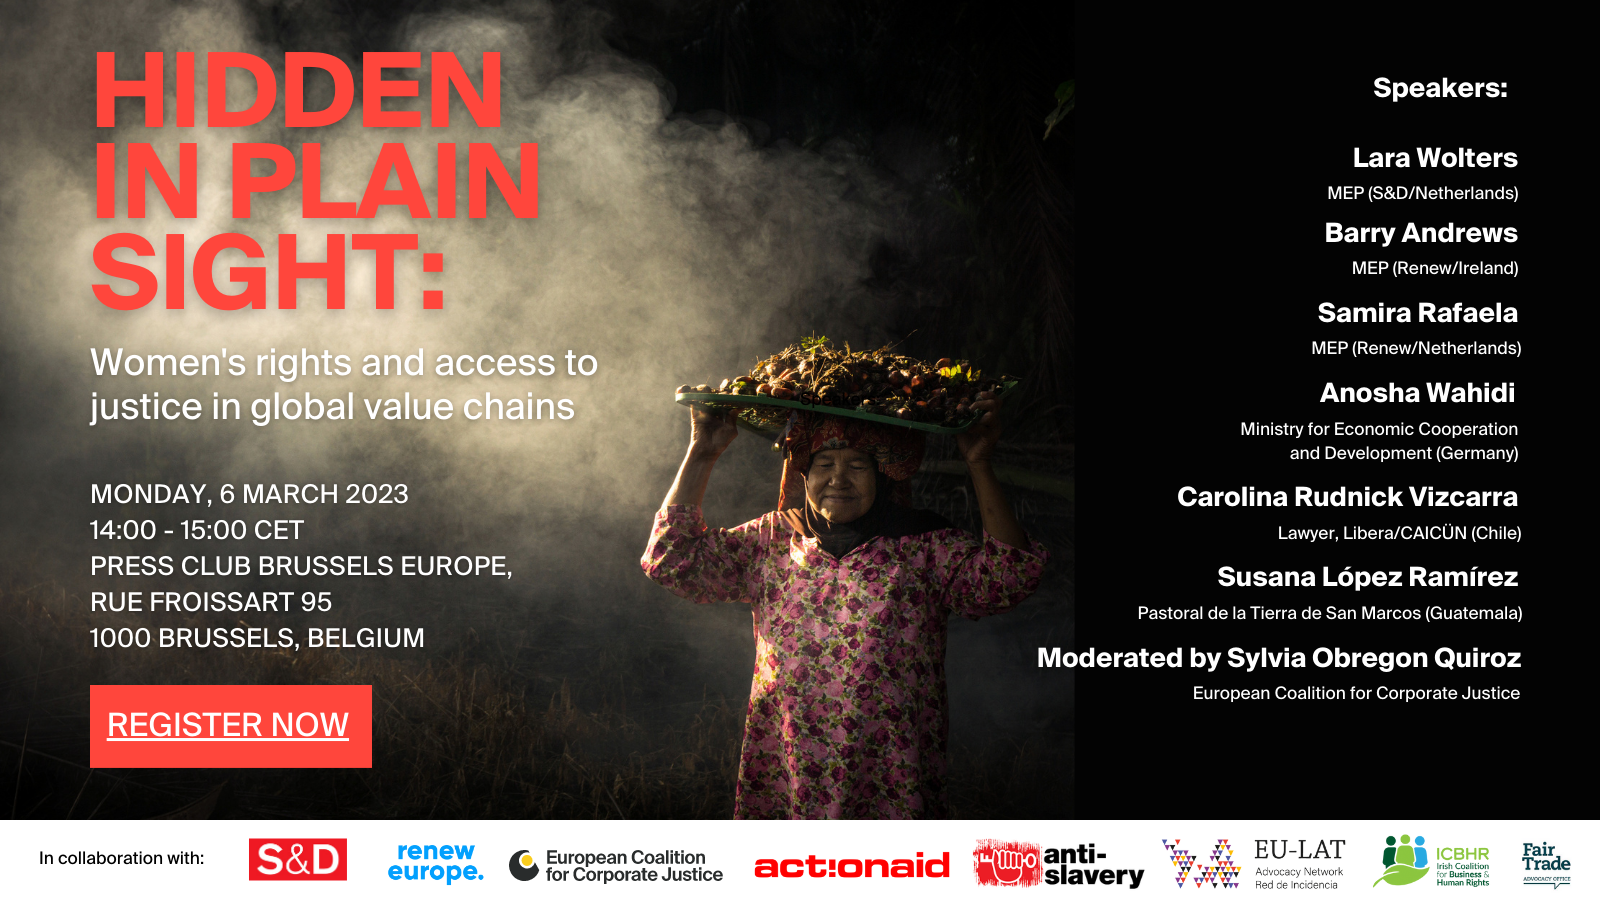 Hidden in plain sight: Women's rights and access to justice in global value chains